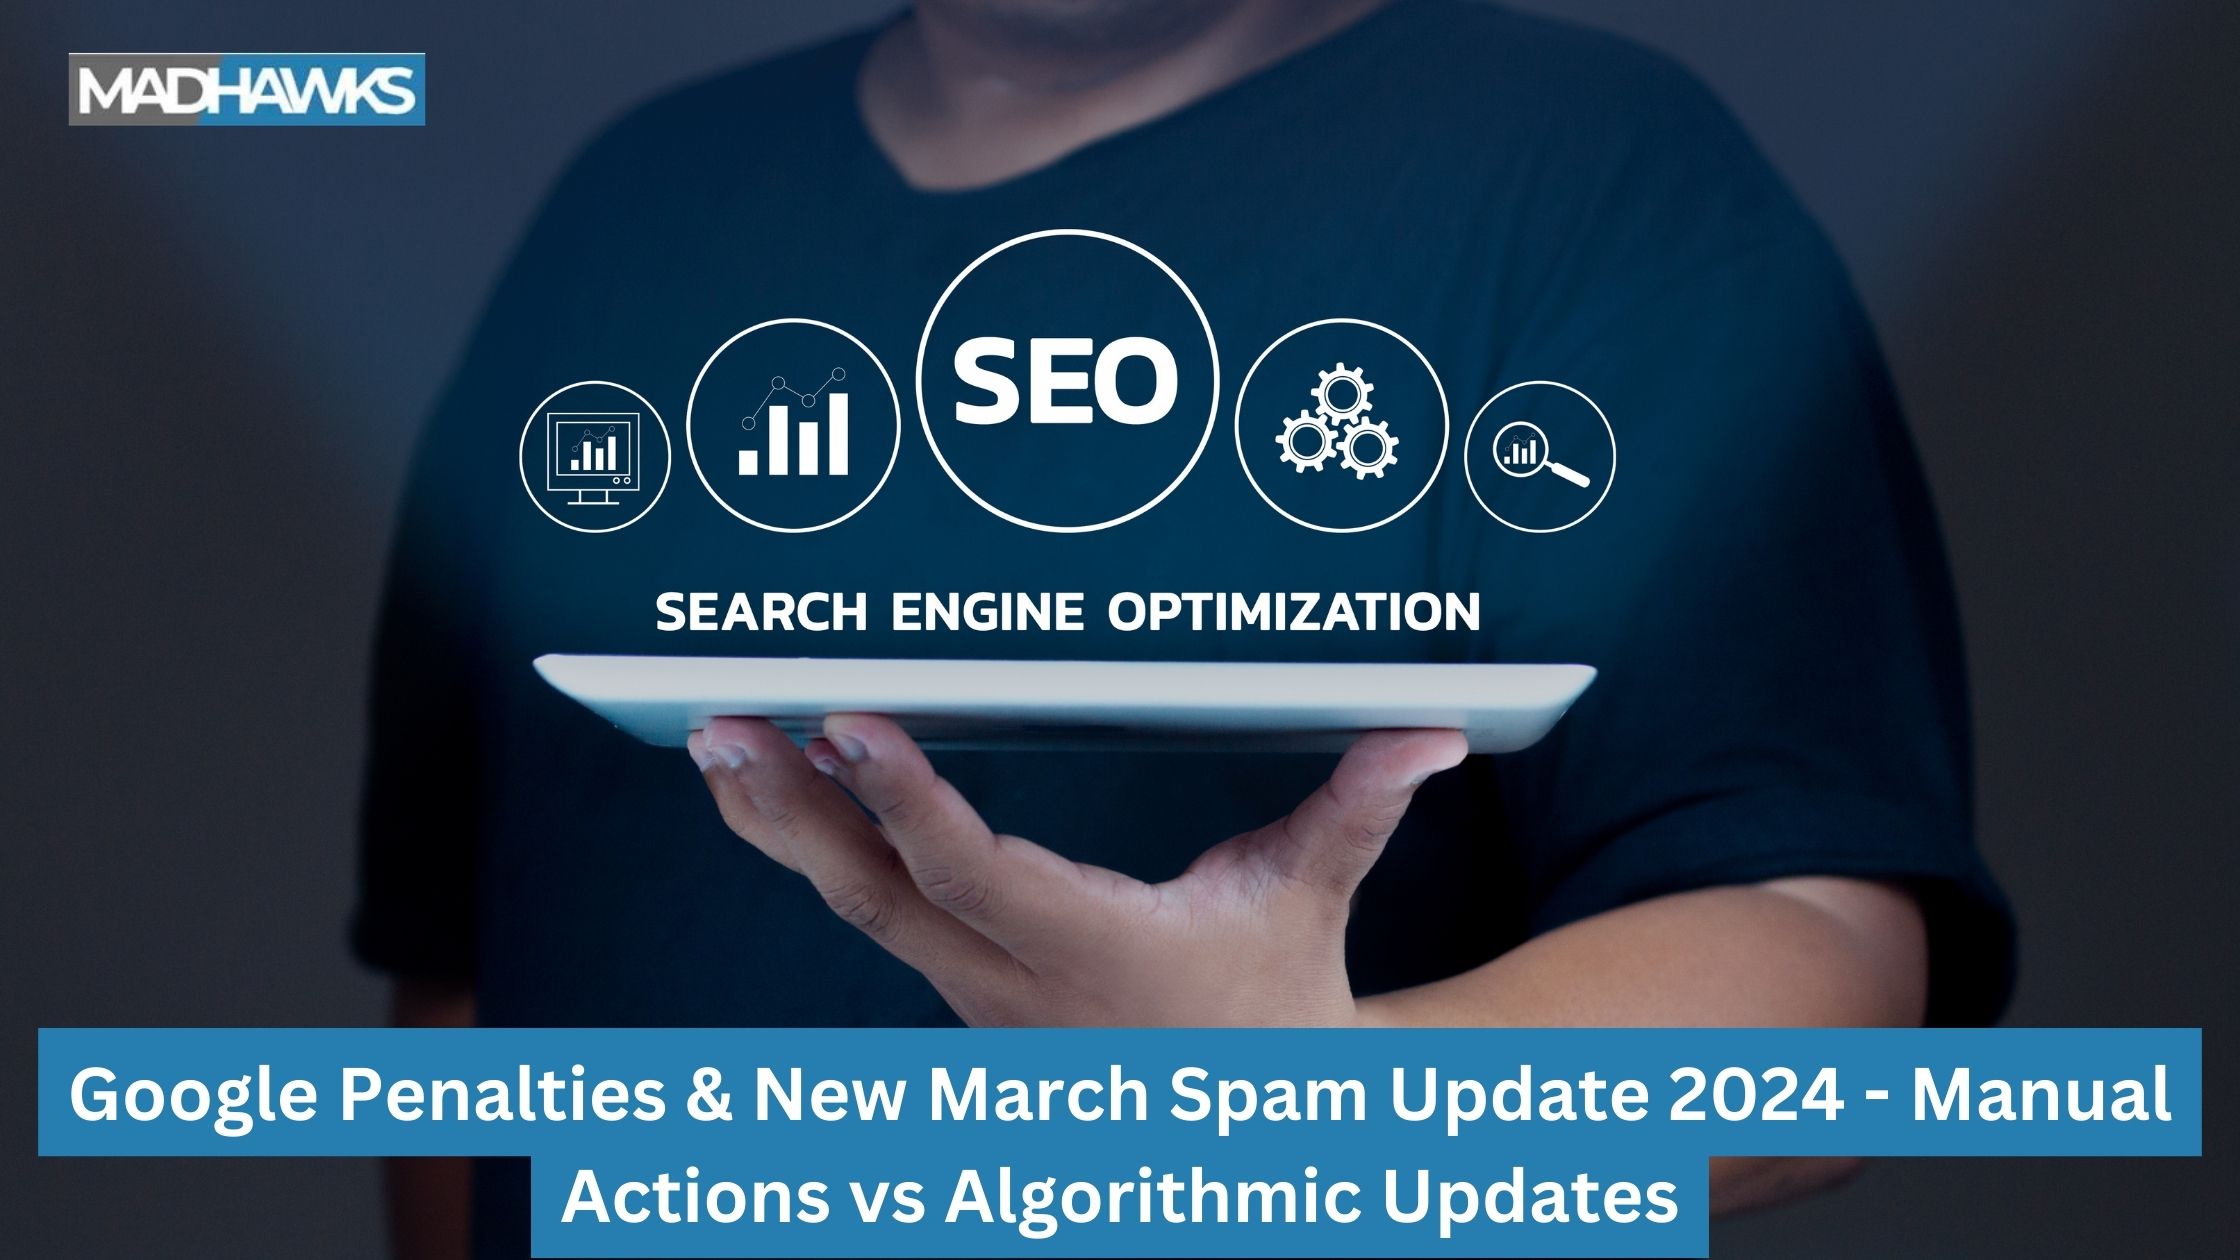 Google Penalties &amp; New March Spam Update 2024 - Manual Actions vs Algorithmic Updates